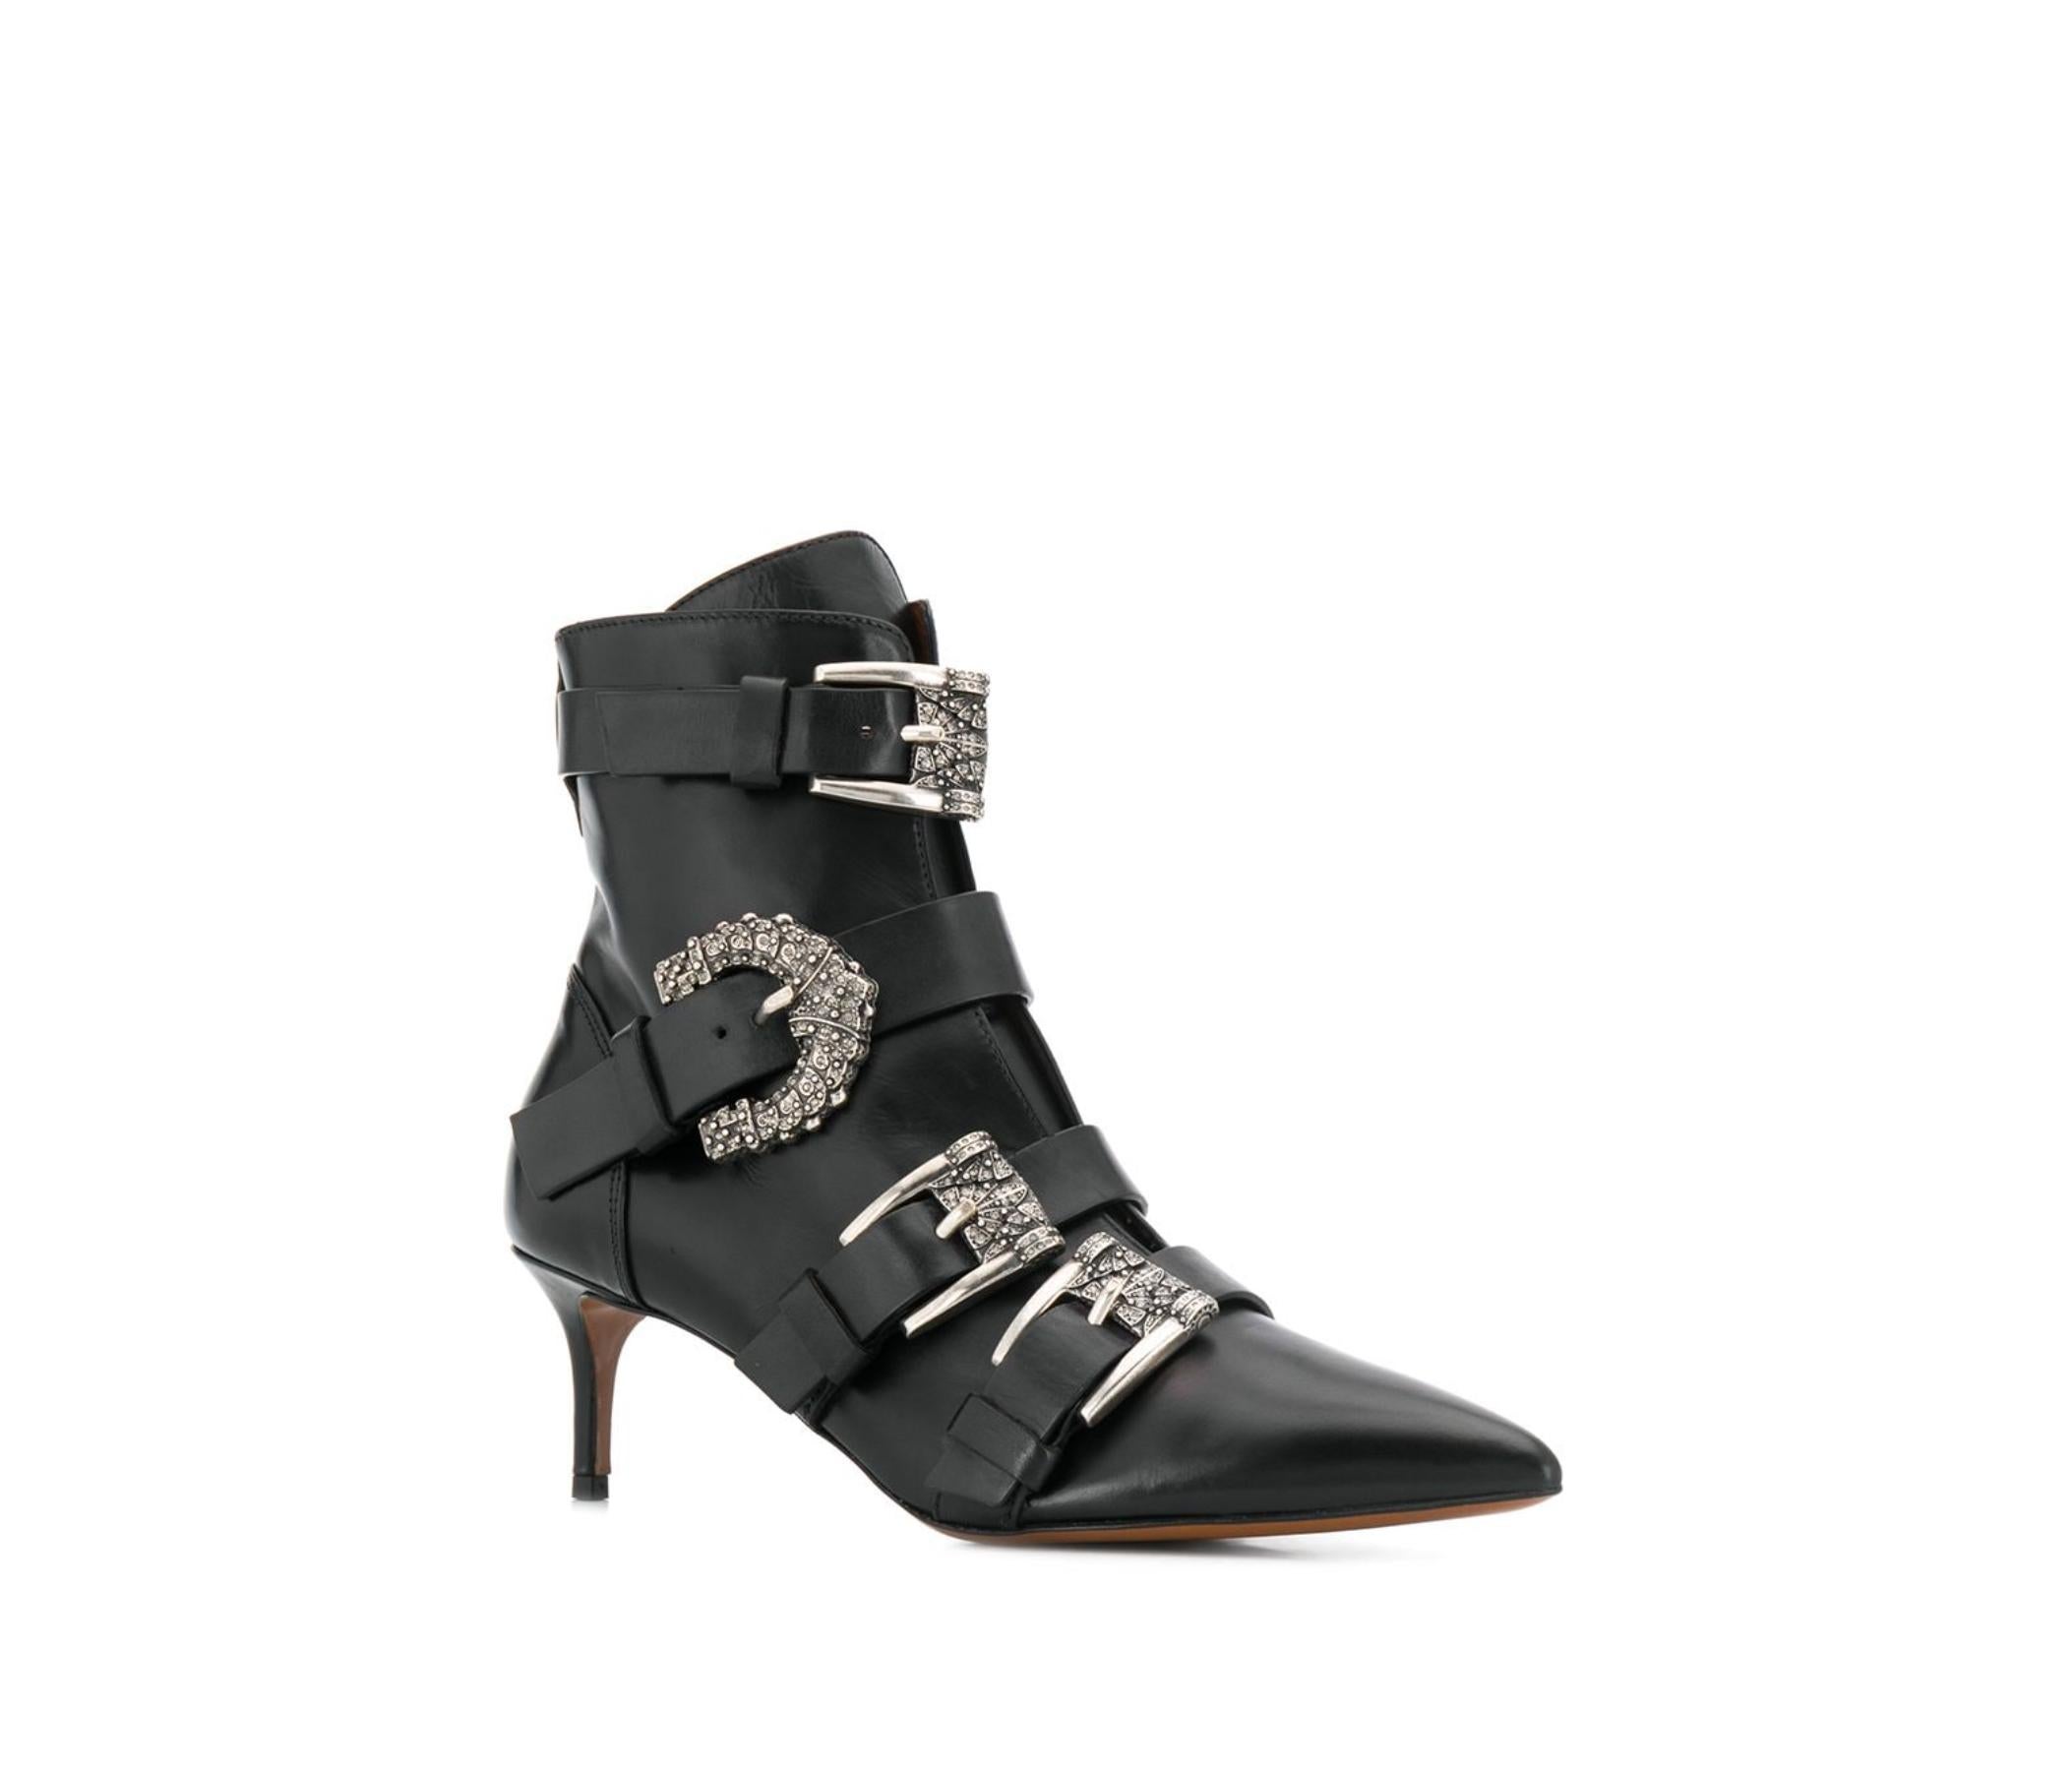 The Etro Fall 2019 Runway side buckle black leather ankle boots features embellished buckles, a pointed toe, and 2.4 inch heel. Brand new with shoebox included. Made in Italy.

Size: 37 (IT)

Measurements (taken from Italian size 39):
Circumference: